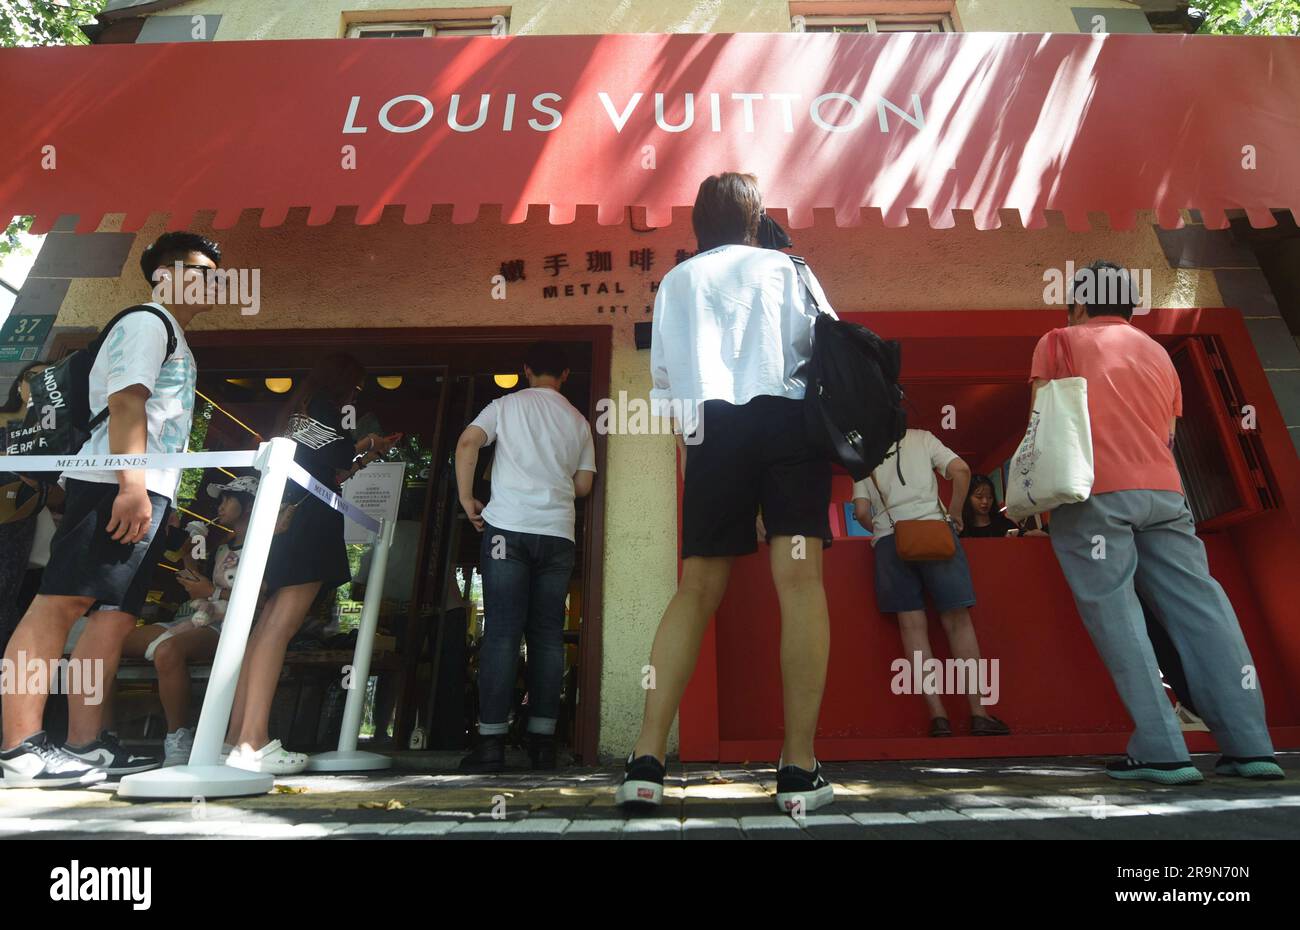 SHANGHAI, CHINA - JUNE 28, 2023 - People line up to buy Louis